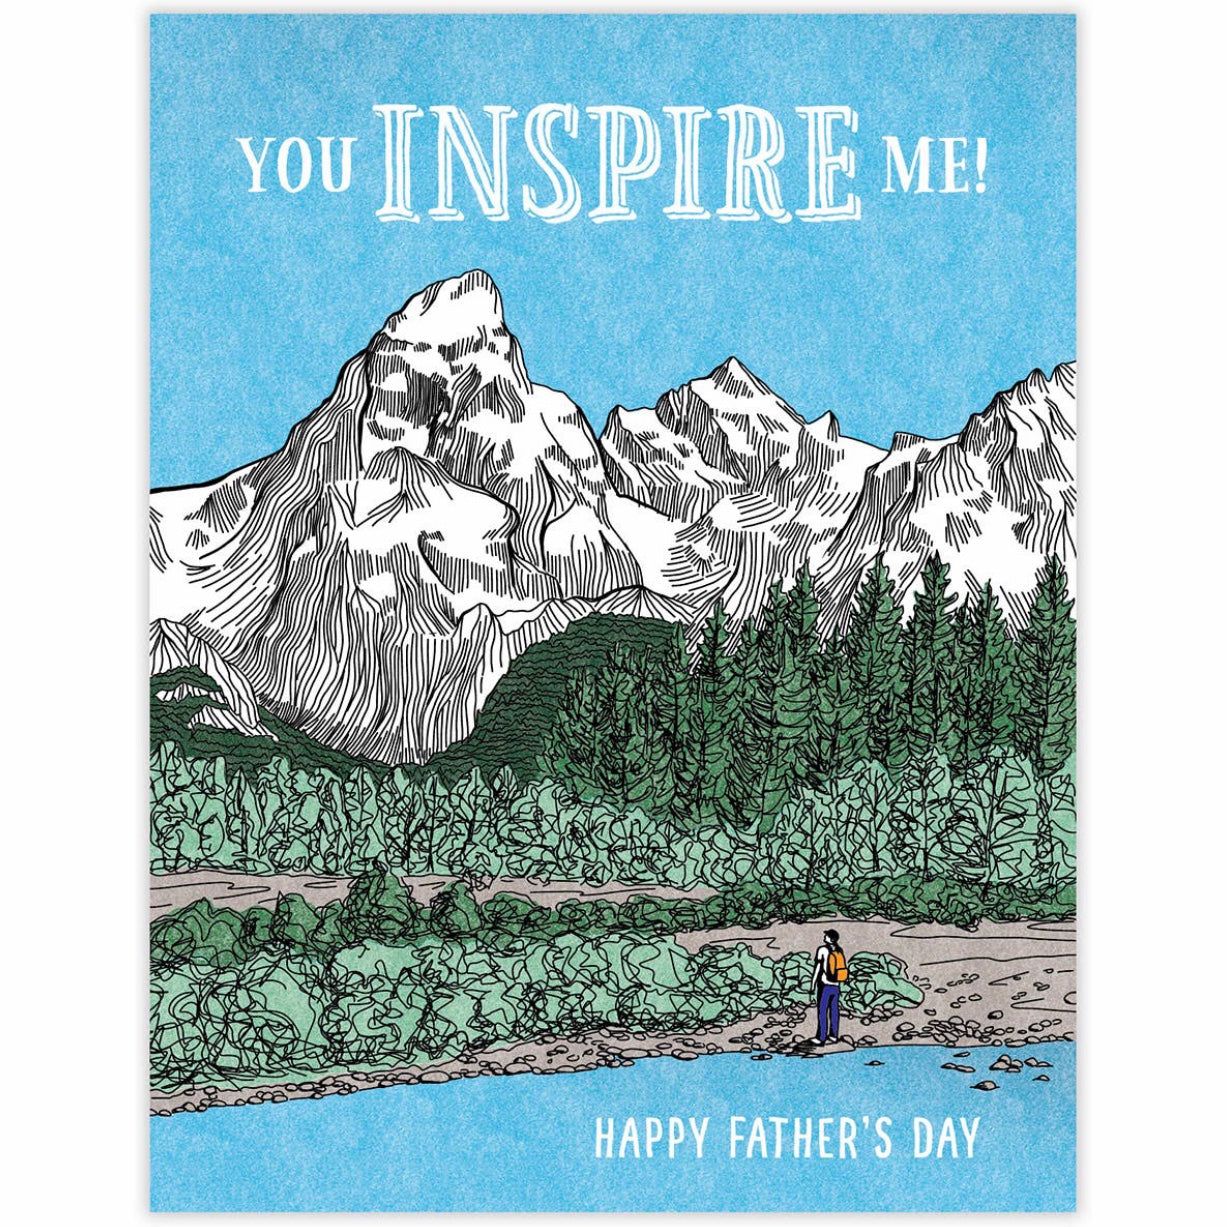 Inspired Fathers day card